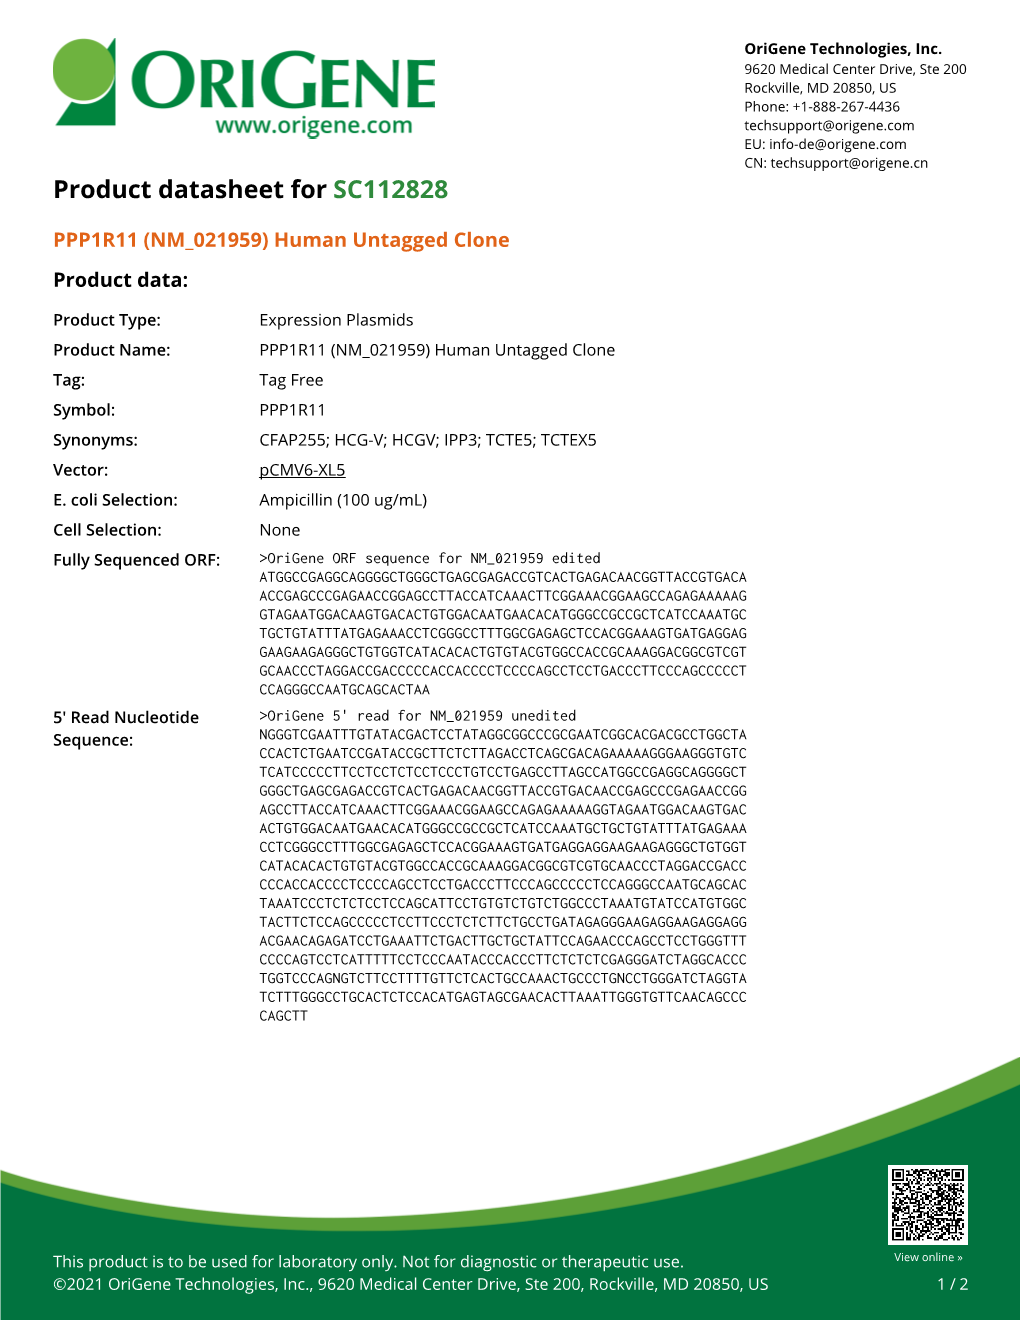 PPP1R11 (NM 021959) Human Untagged Clone Product Data